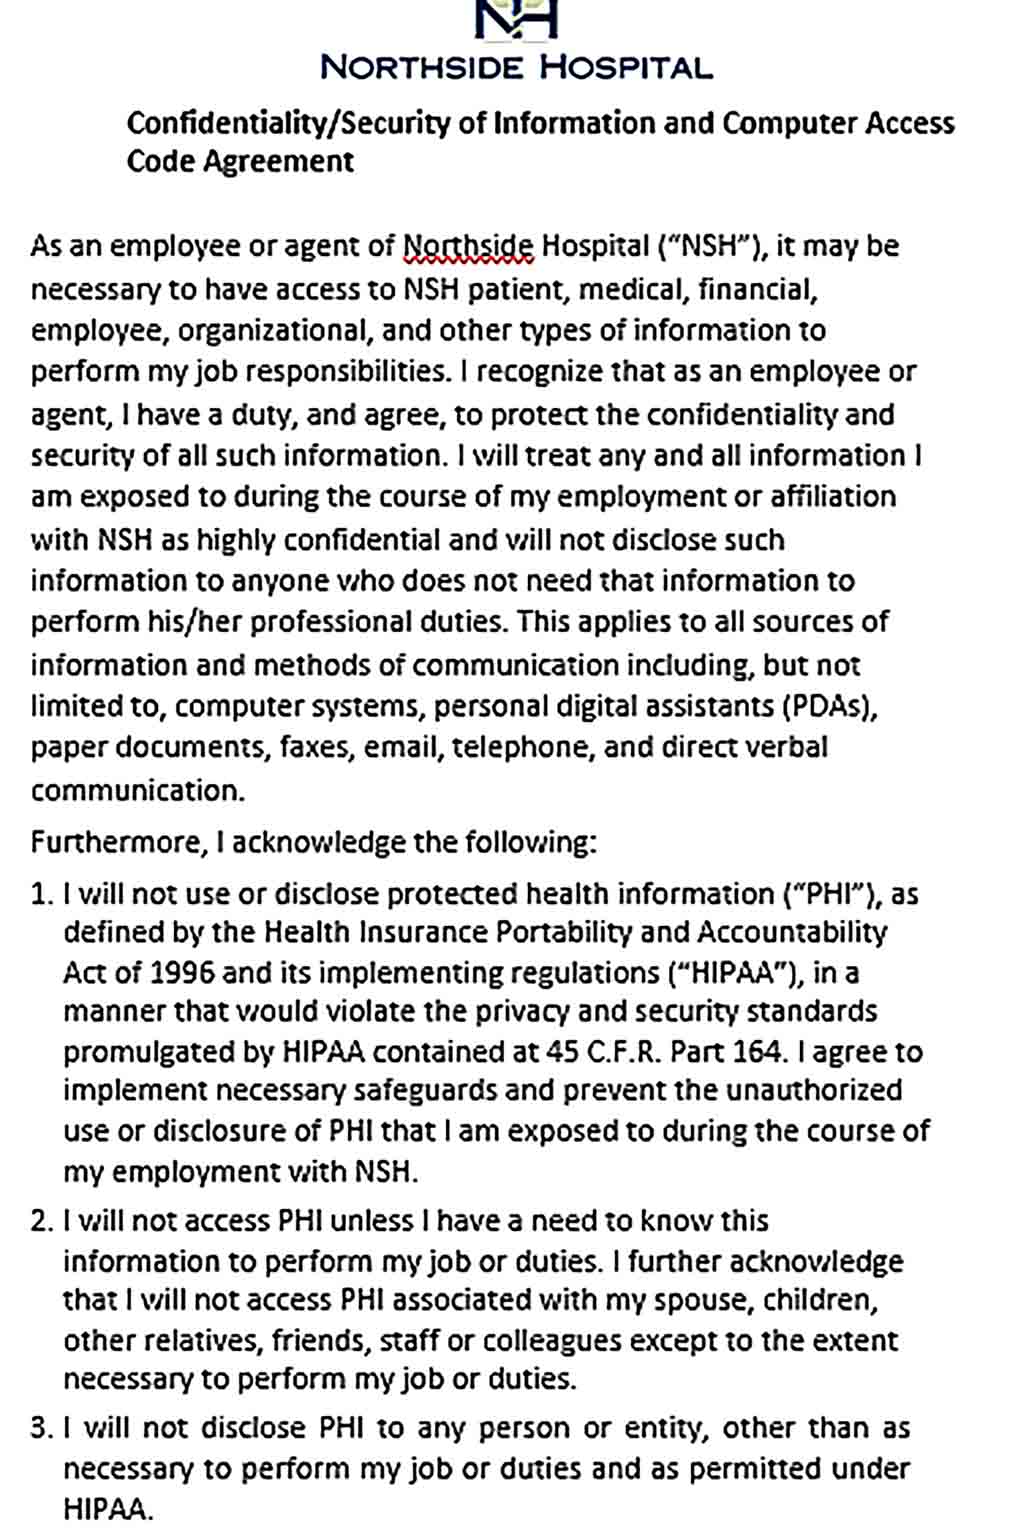 Sample Computer Security Confidentiality Agreement